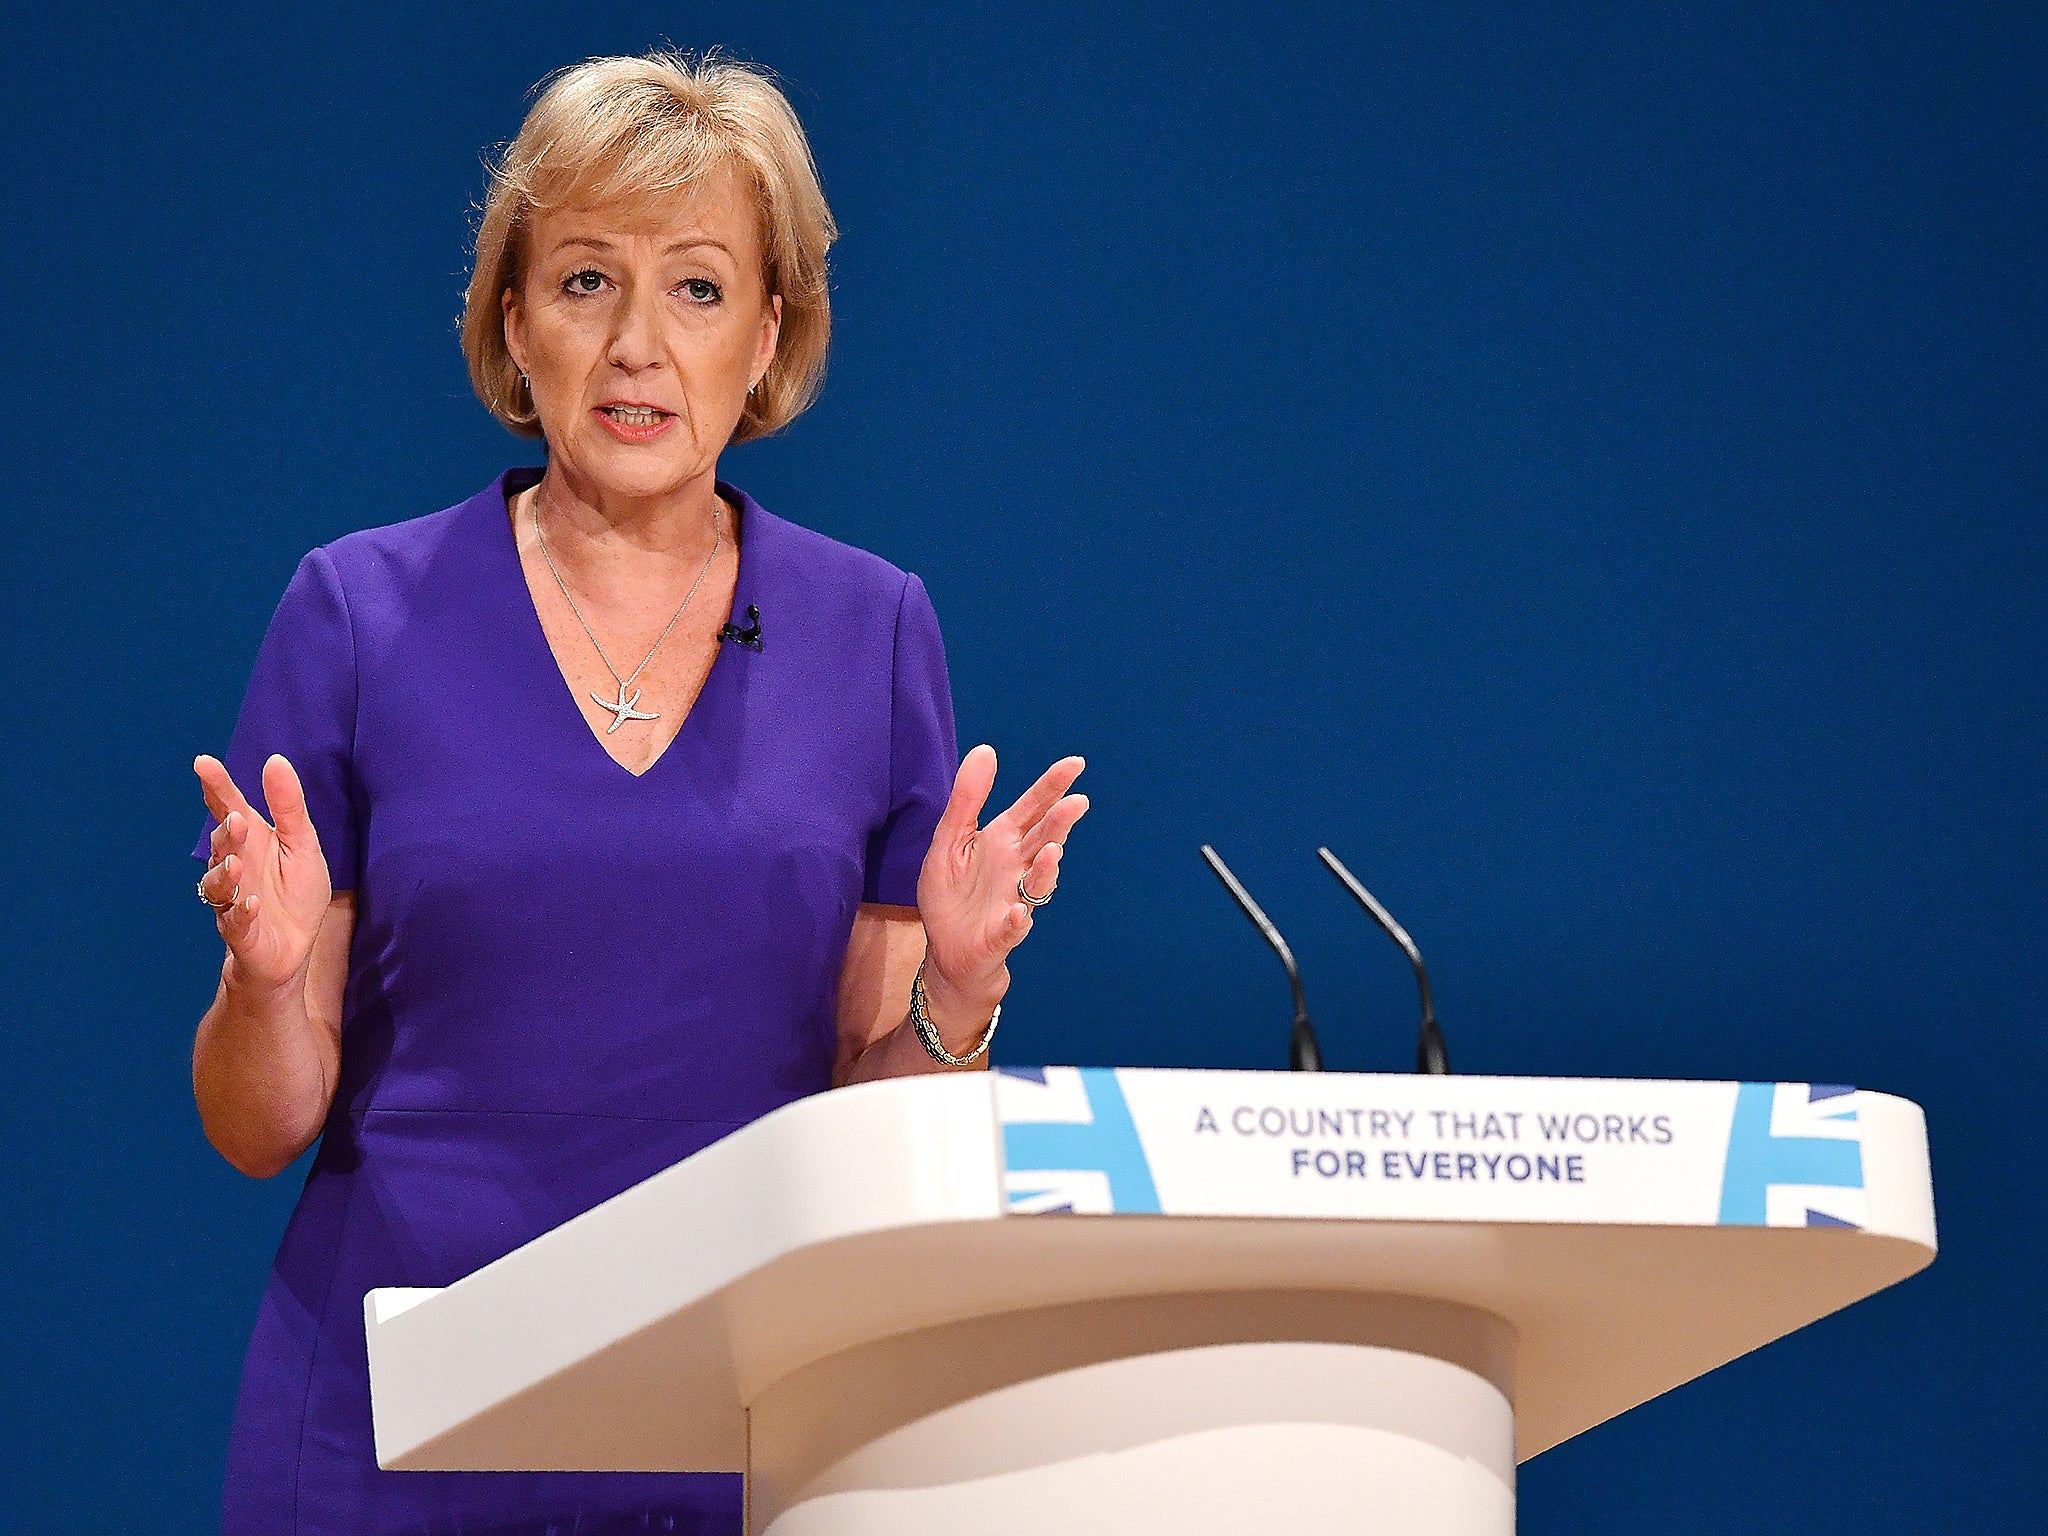 Environment Minister Andrea Leadsom suggested air pollution was not an emergency